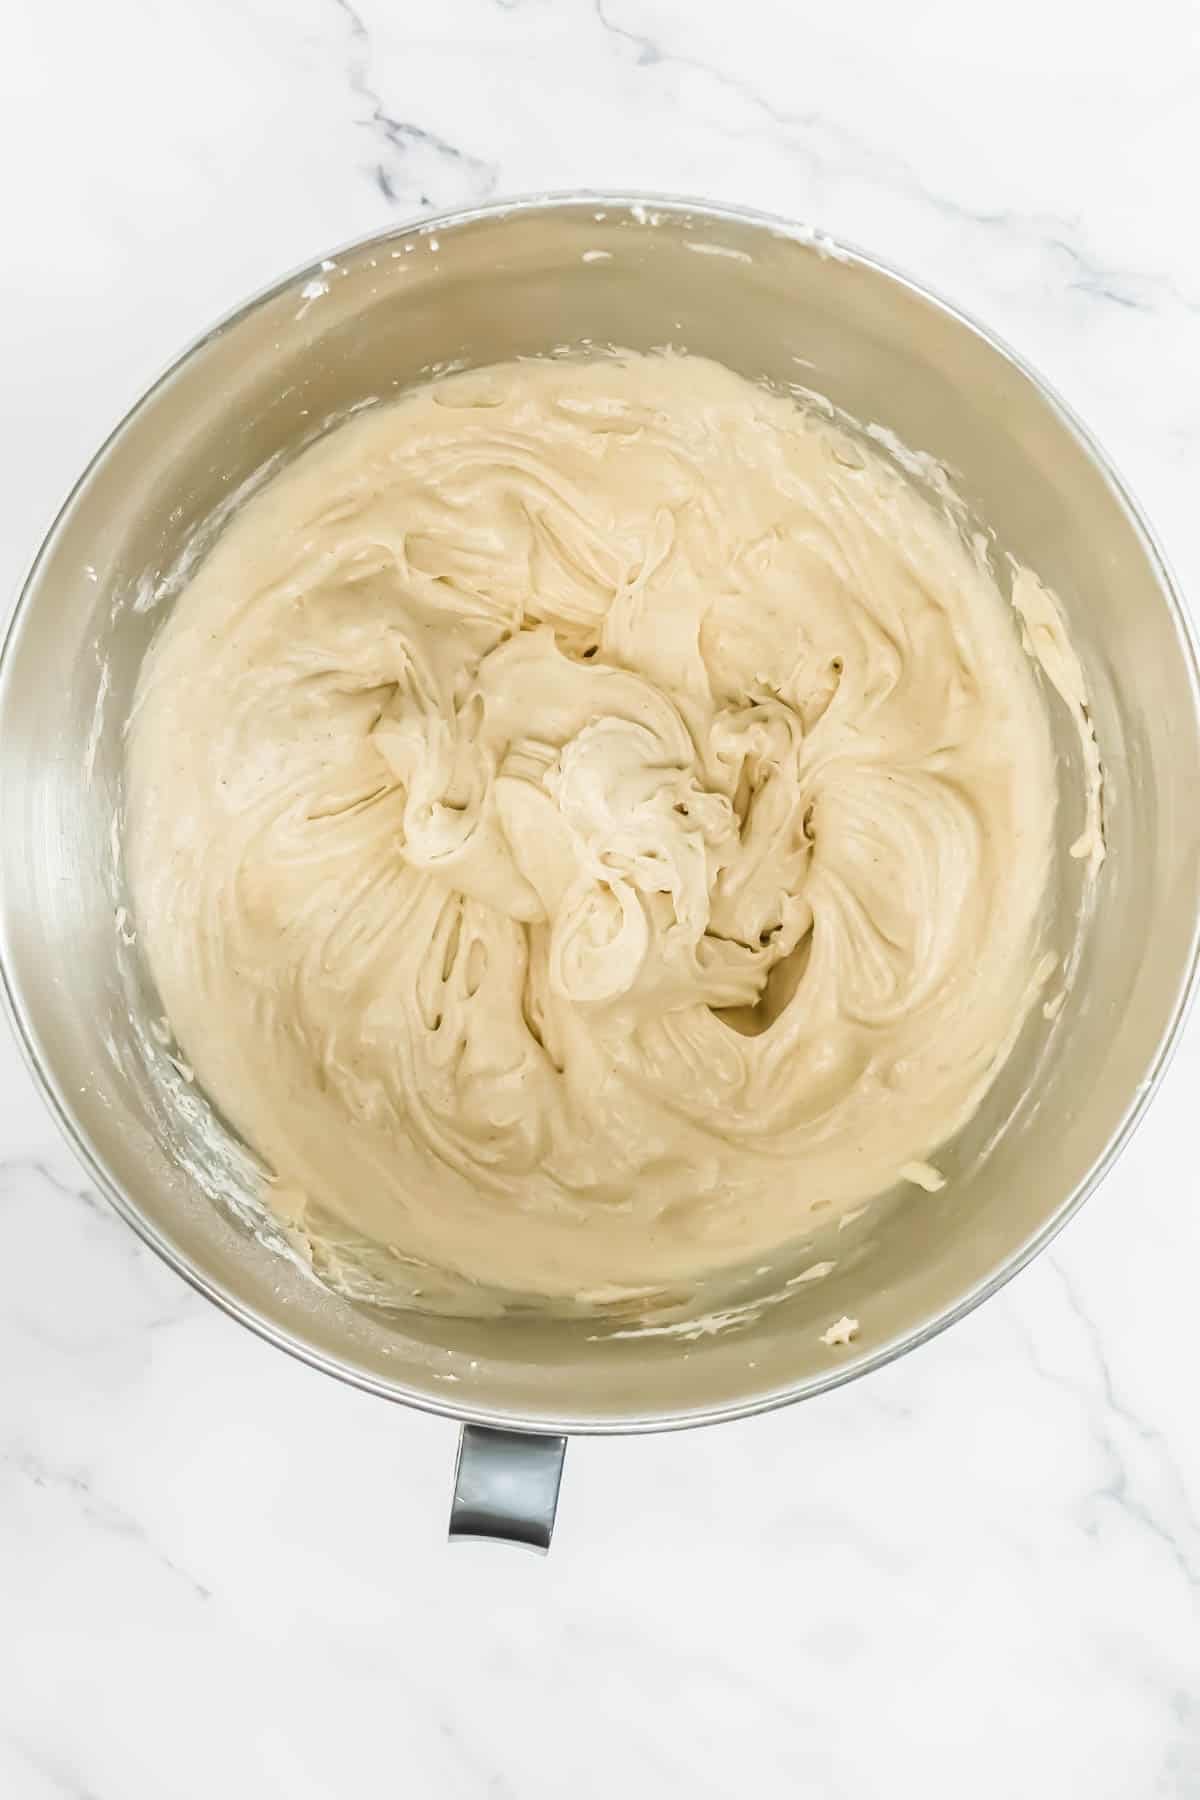 Smooth RumChata cupcakes frosting in the bowl of a stand mixer.